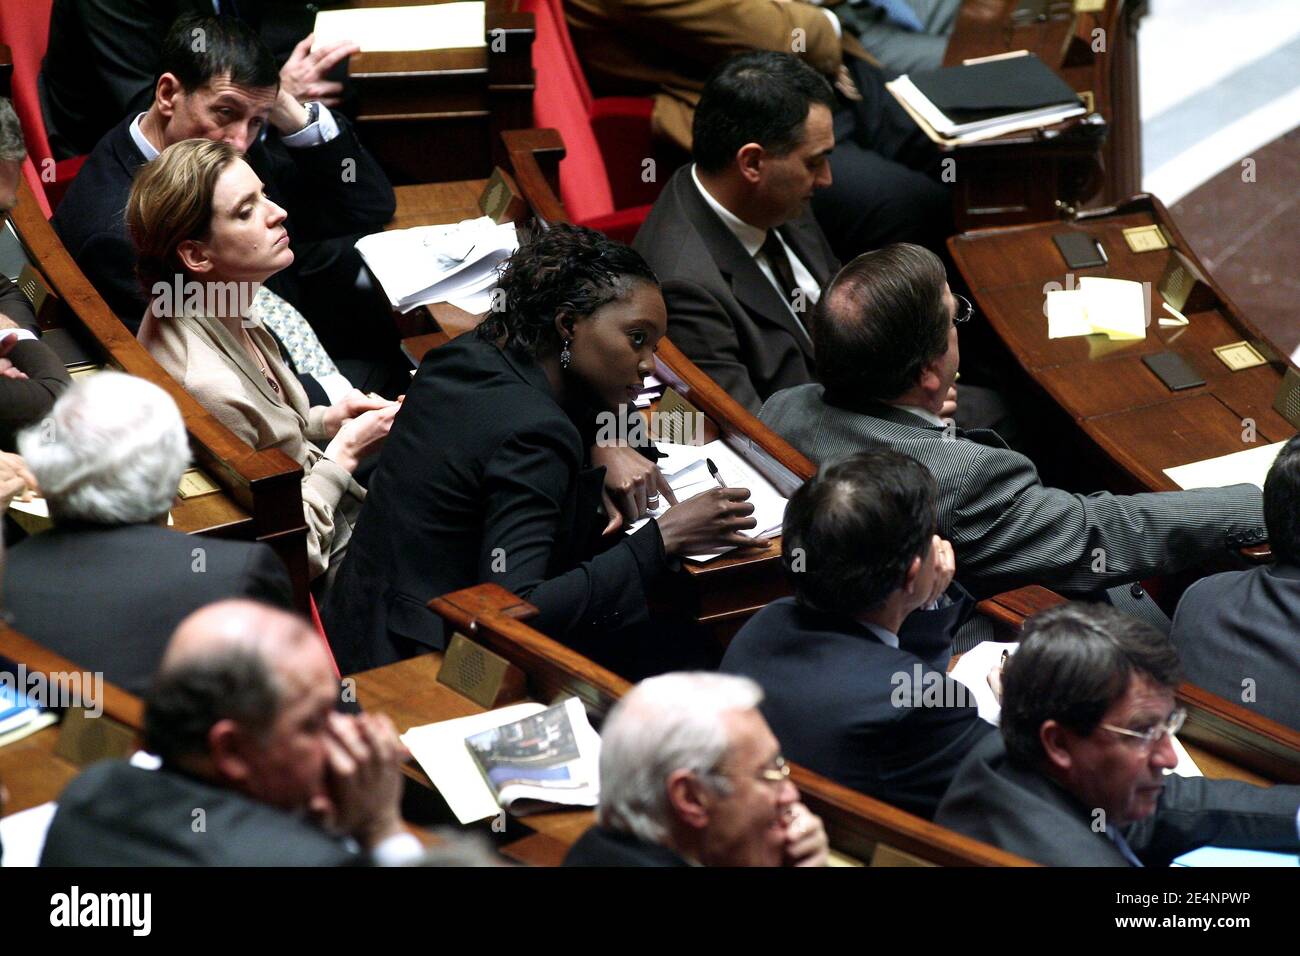 Rama Yade attends a work session at the National Assembly in Paris, France on January 8, 2008. Photo by Mousse/ABACAPRESS.COM Stock Photo